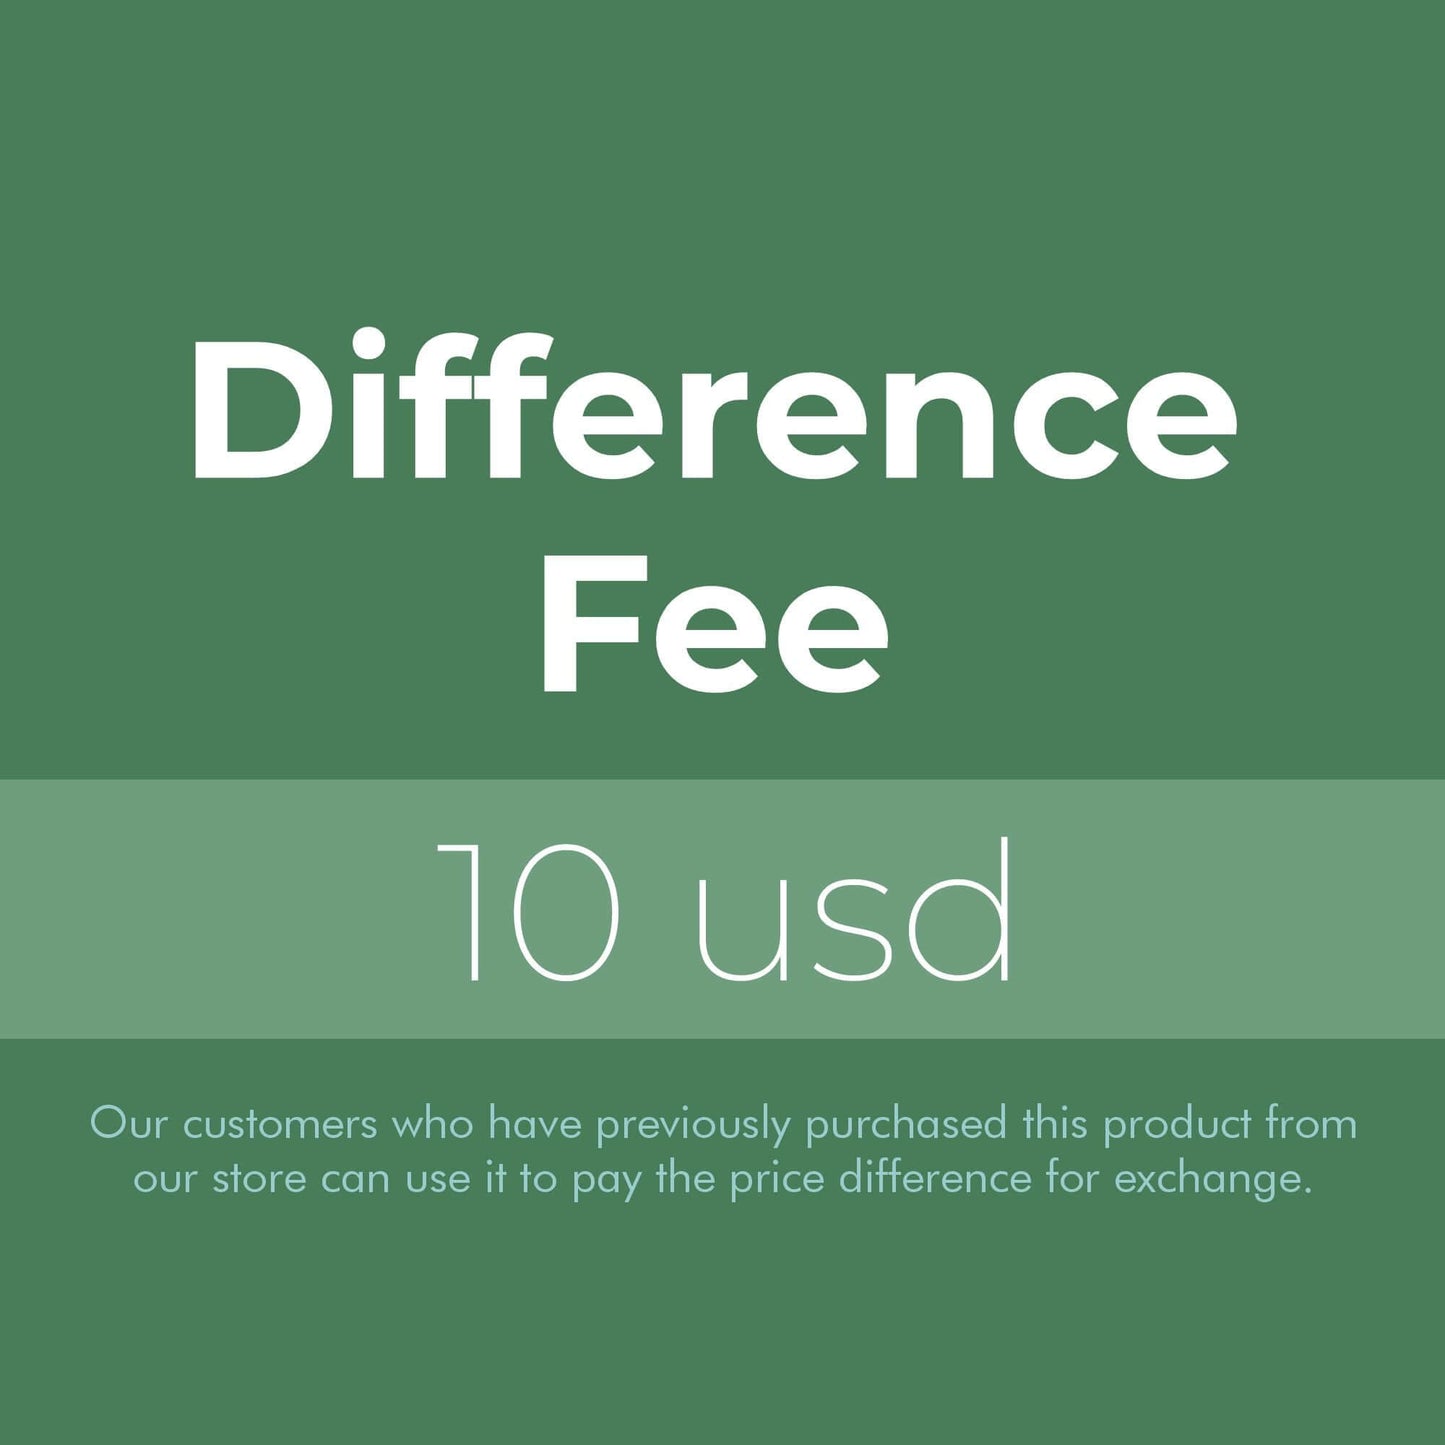 10 usd difference